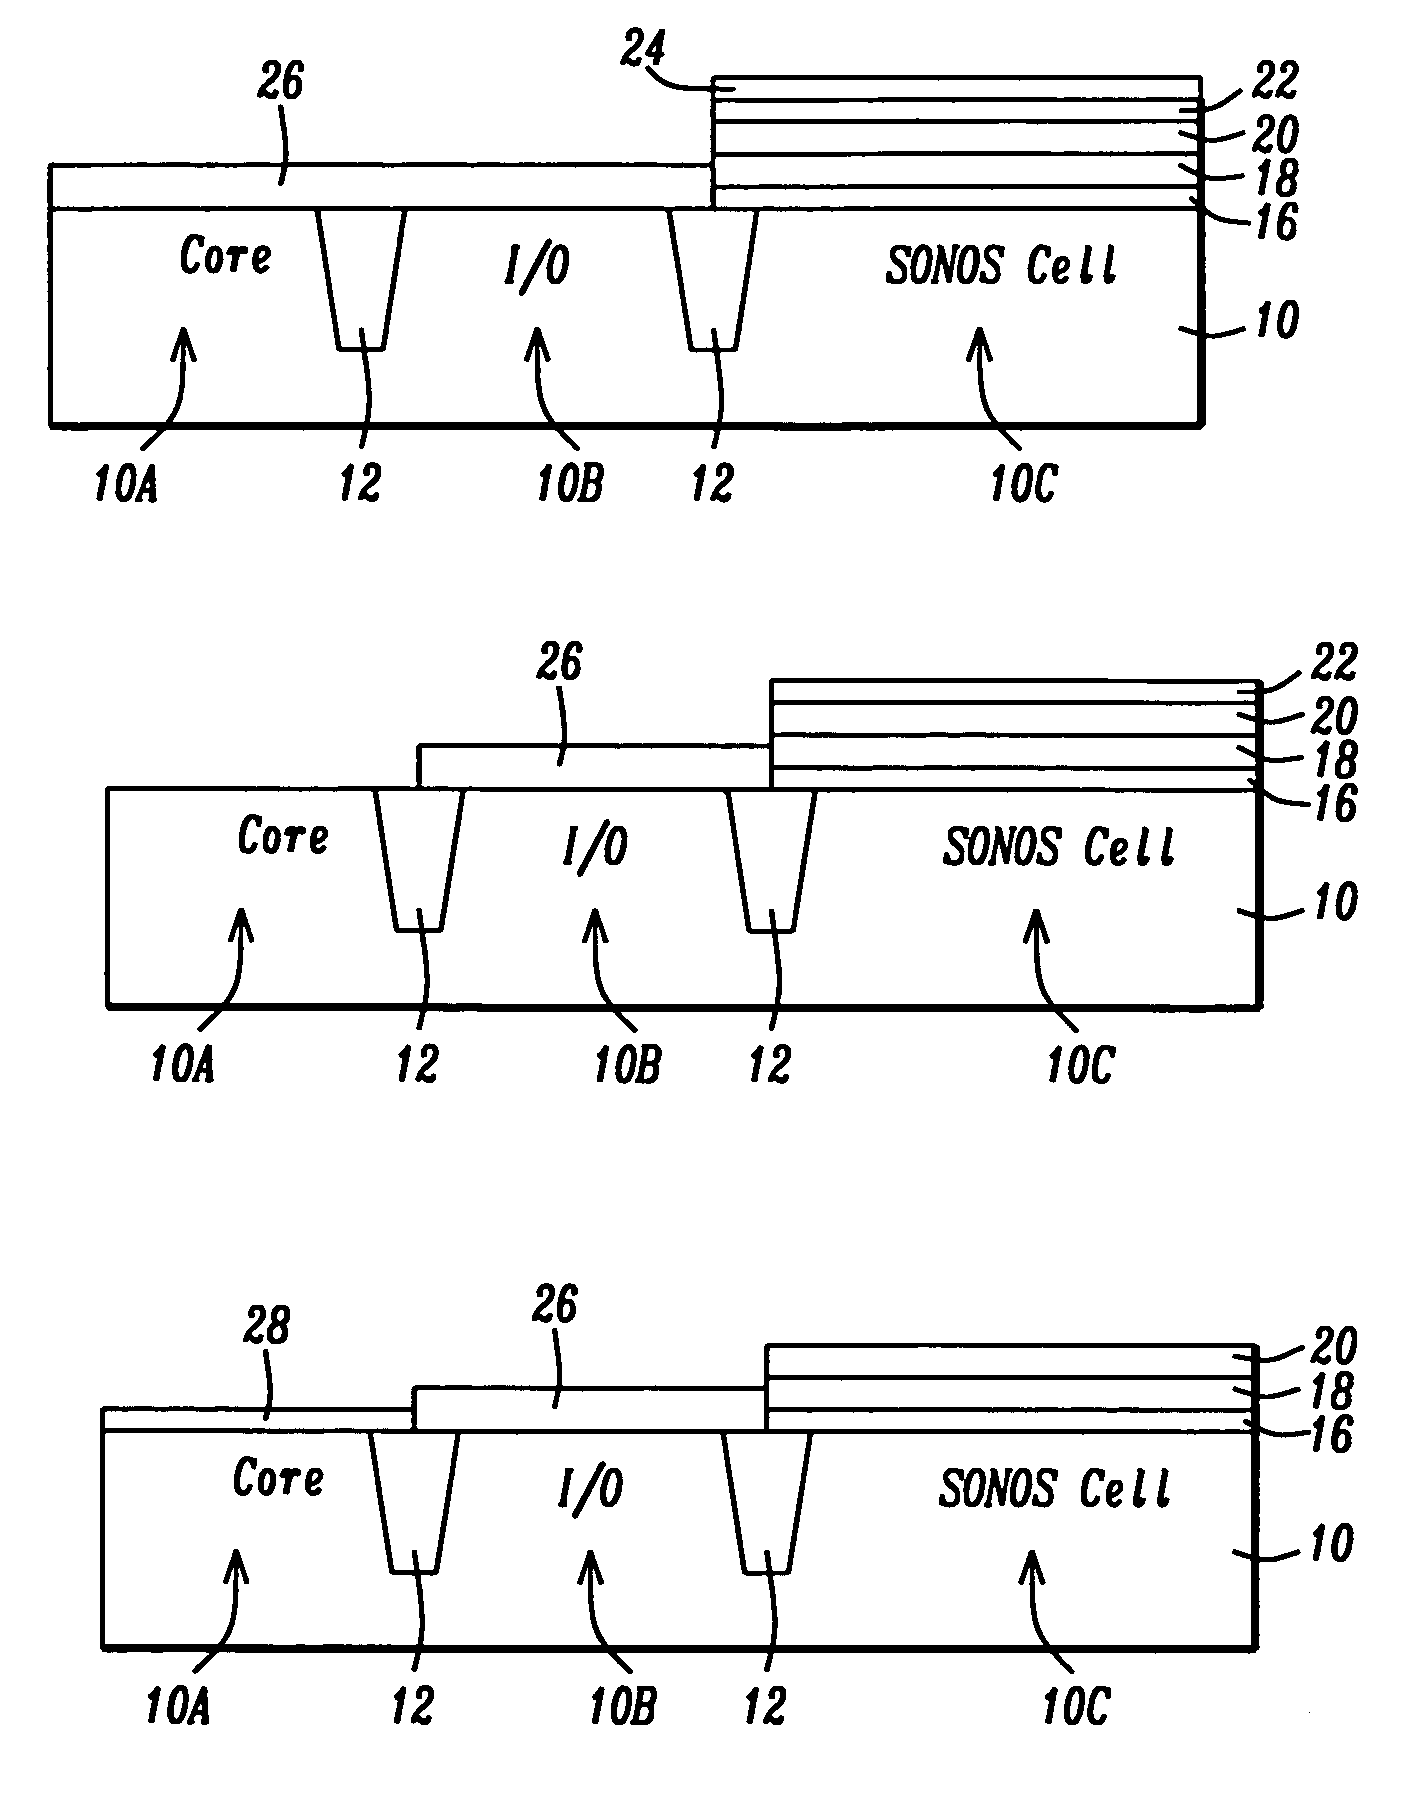 Method for integrating a SONOS gate oxide transistor into a logic/analog integrated circuit having several gate oxide thicknesses